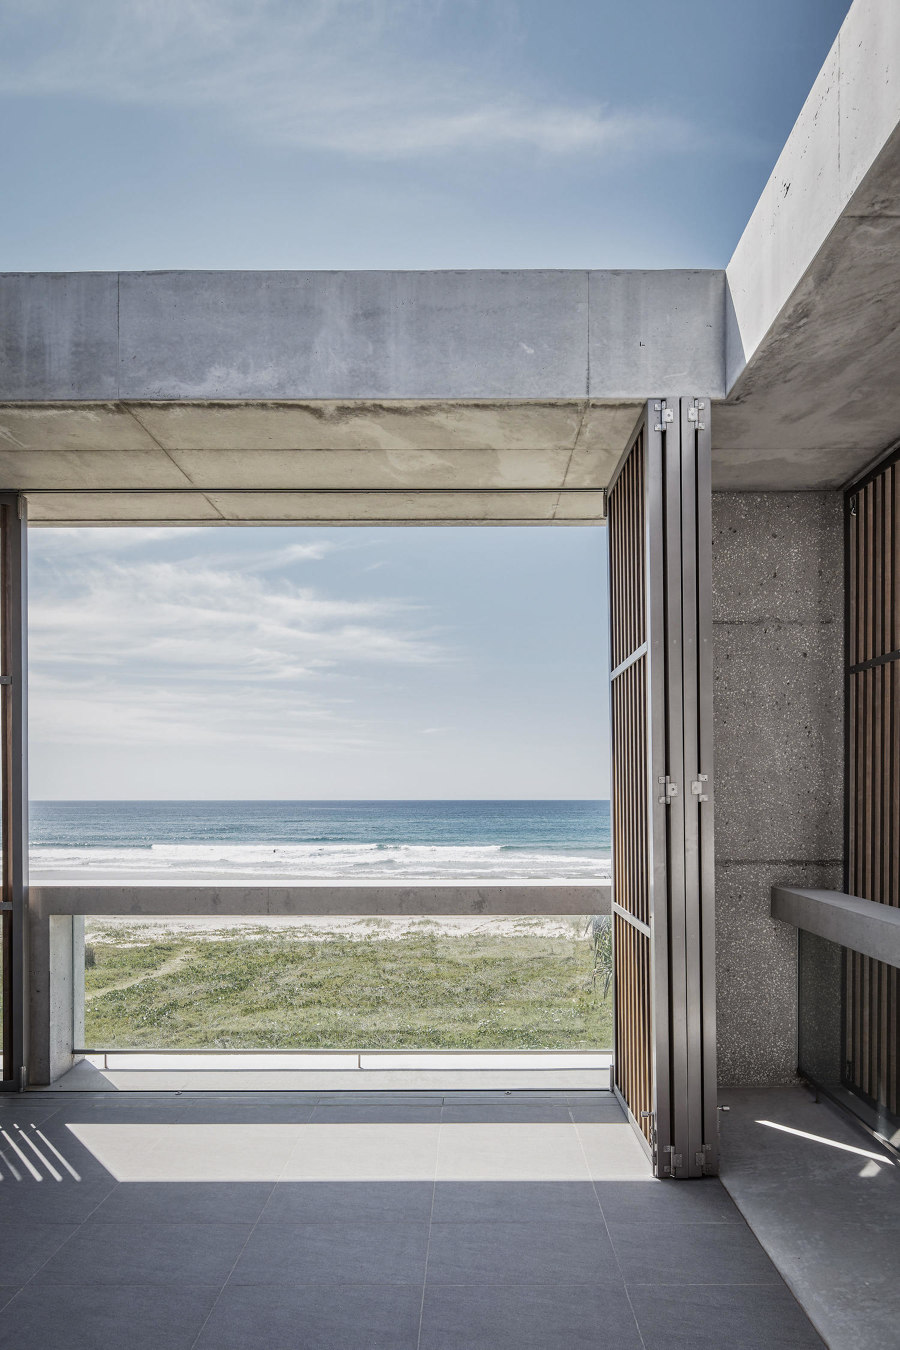 Shore thing: new beach-house projects | News